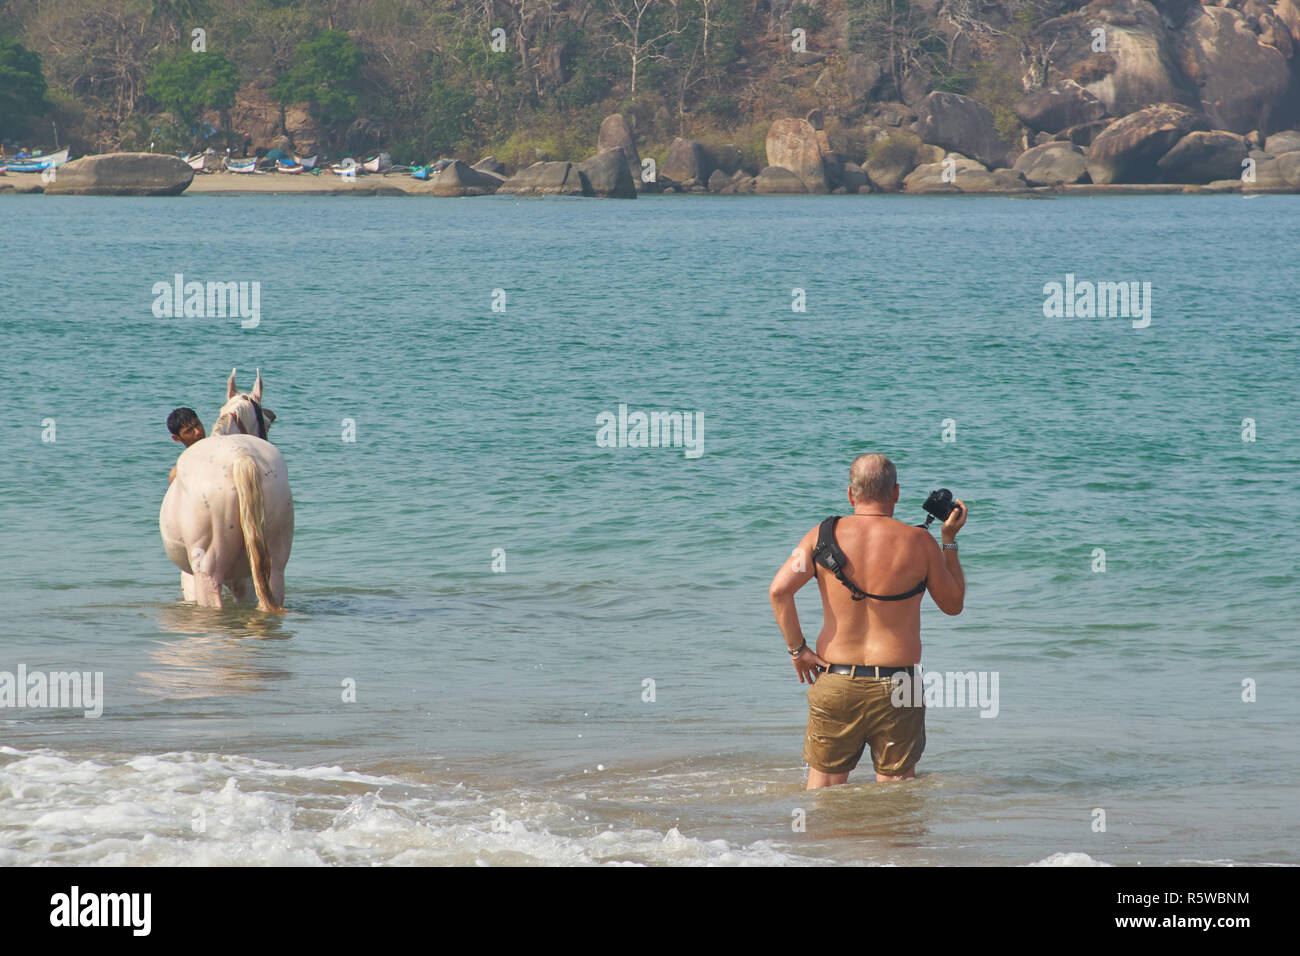 A tourist taking a picture of a man washing his horse in the Arabian sea Stock Photo